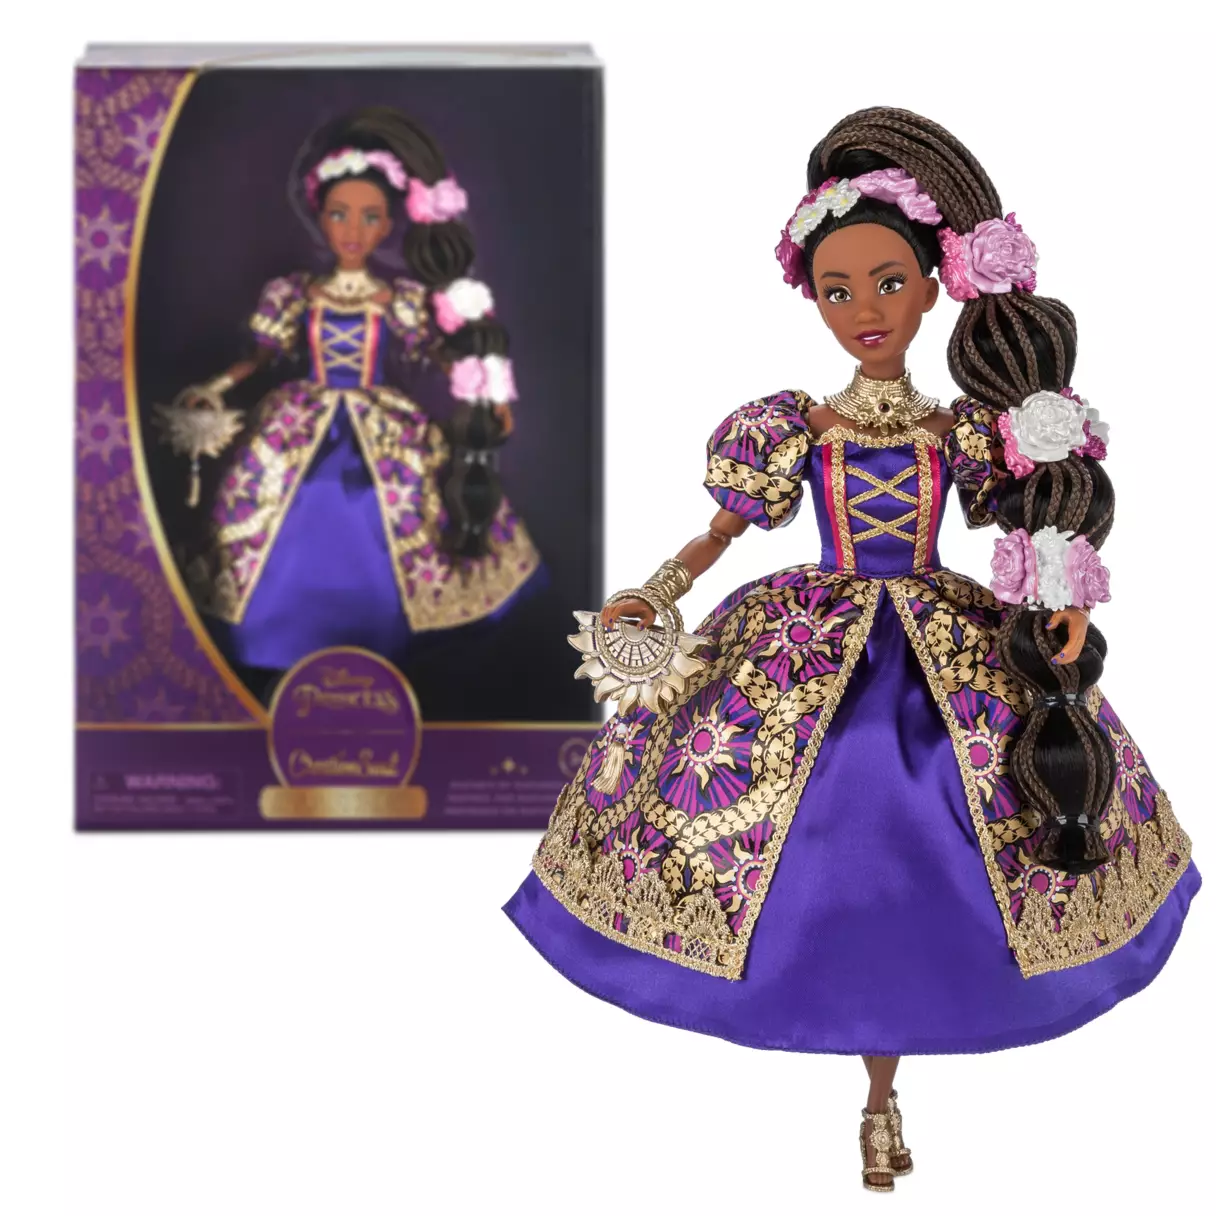 Disney and CreativeSoul launch Disney Princess inspired dolls collaboration  - ABC7 Chicago